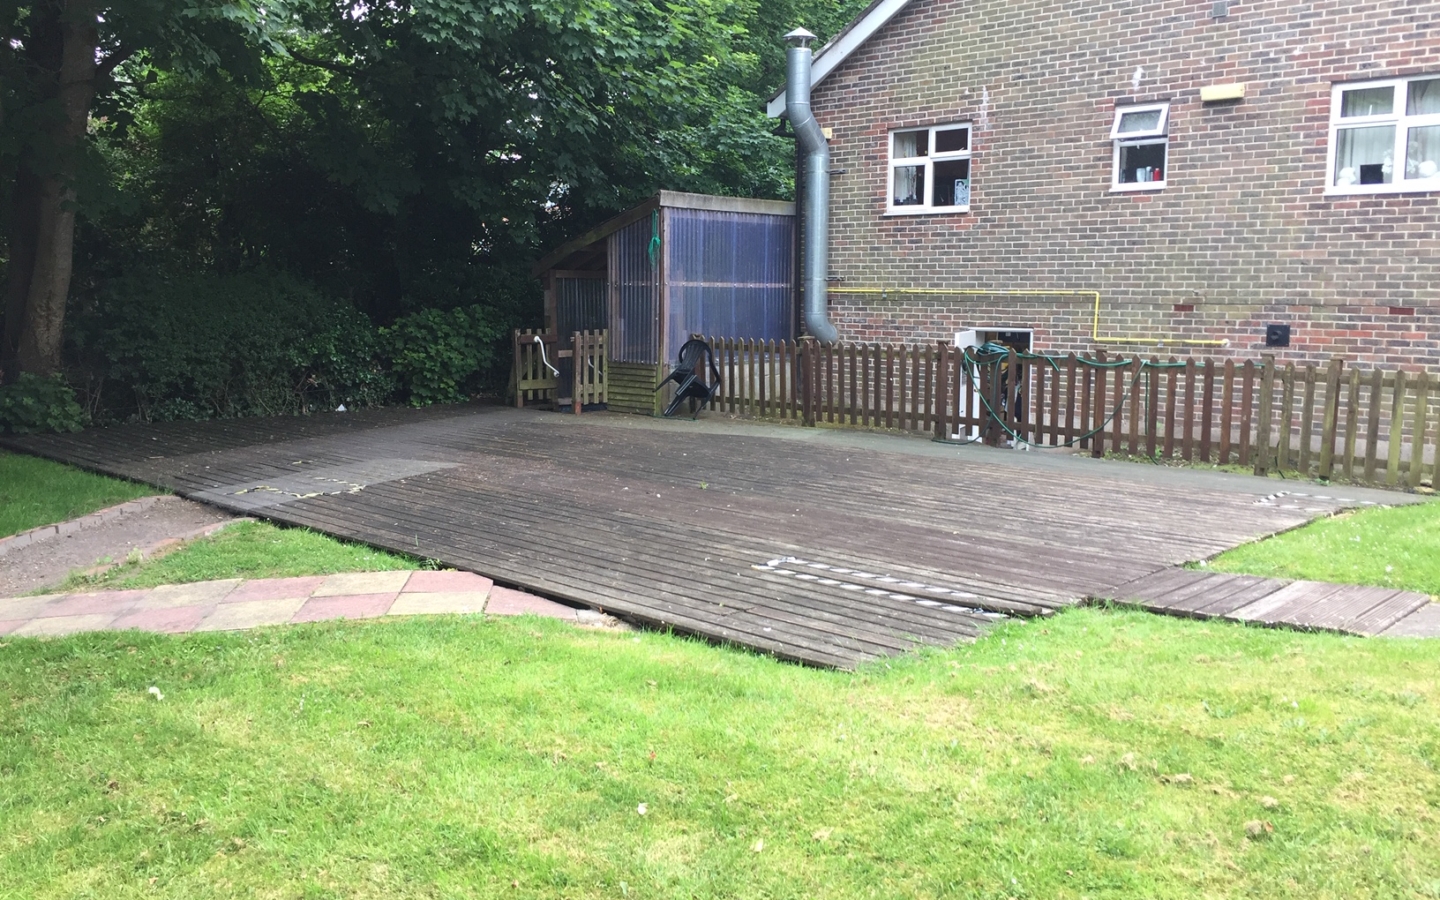 care home decking before replaced with paving